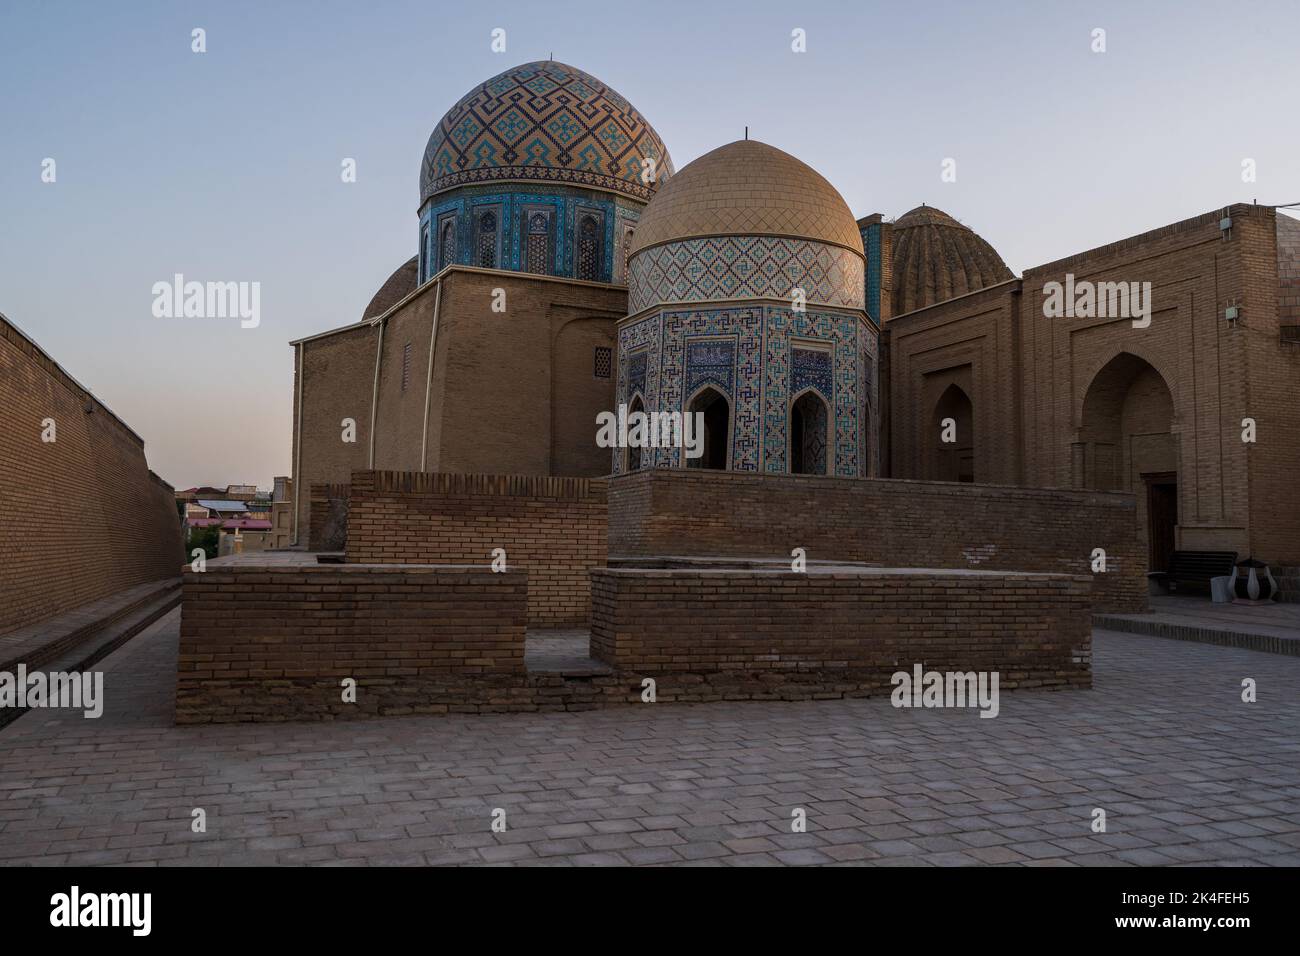 The blue tiled facades domes and arches of the Shah-i-Zinda mausoleum complex at sunset, Samarkand with very few or no people. Stock Photo